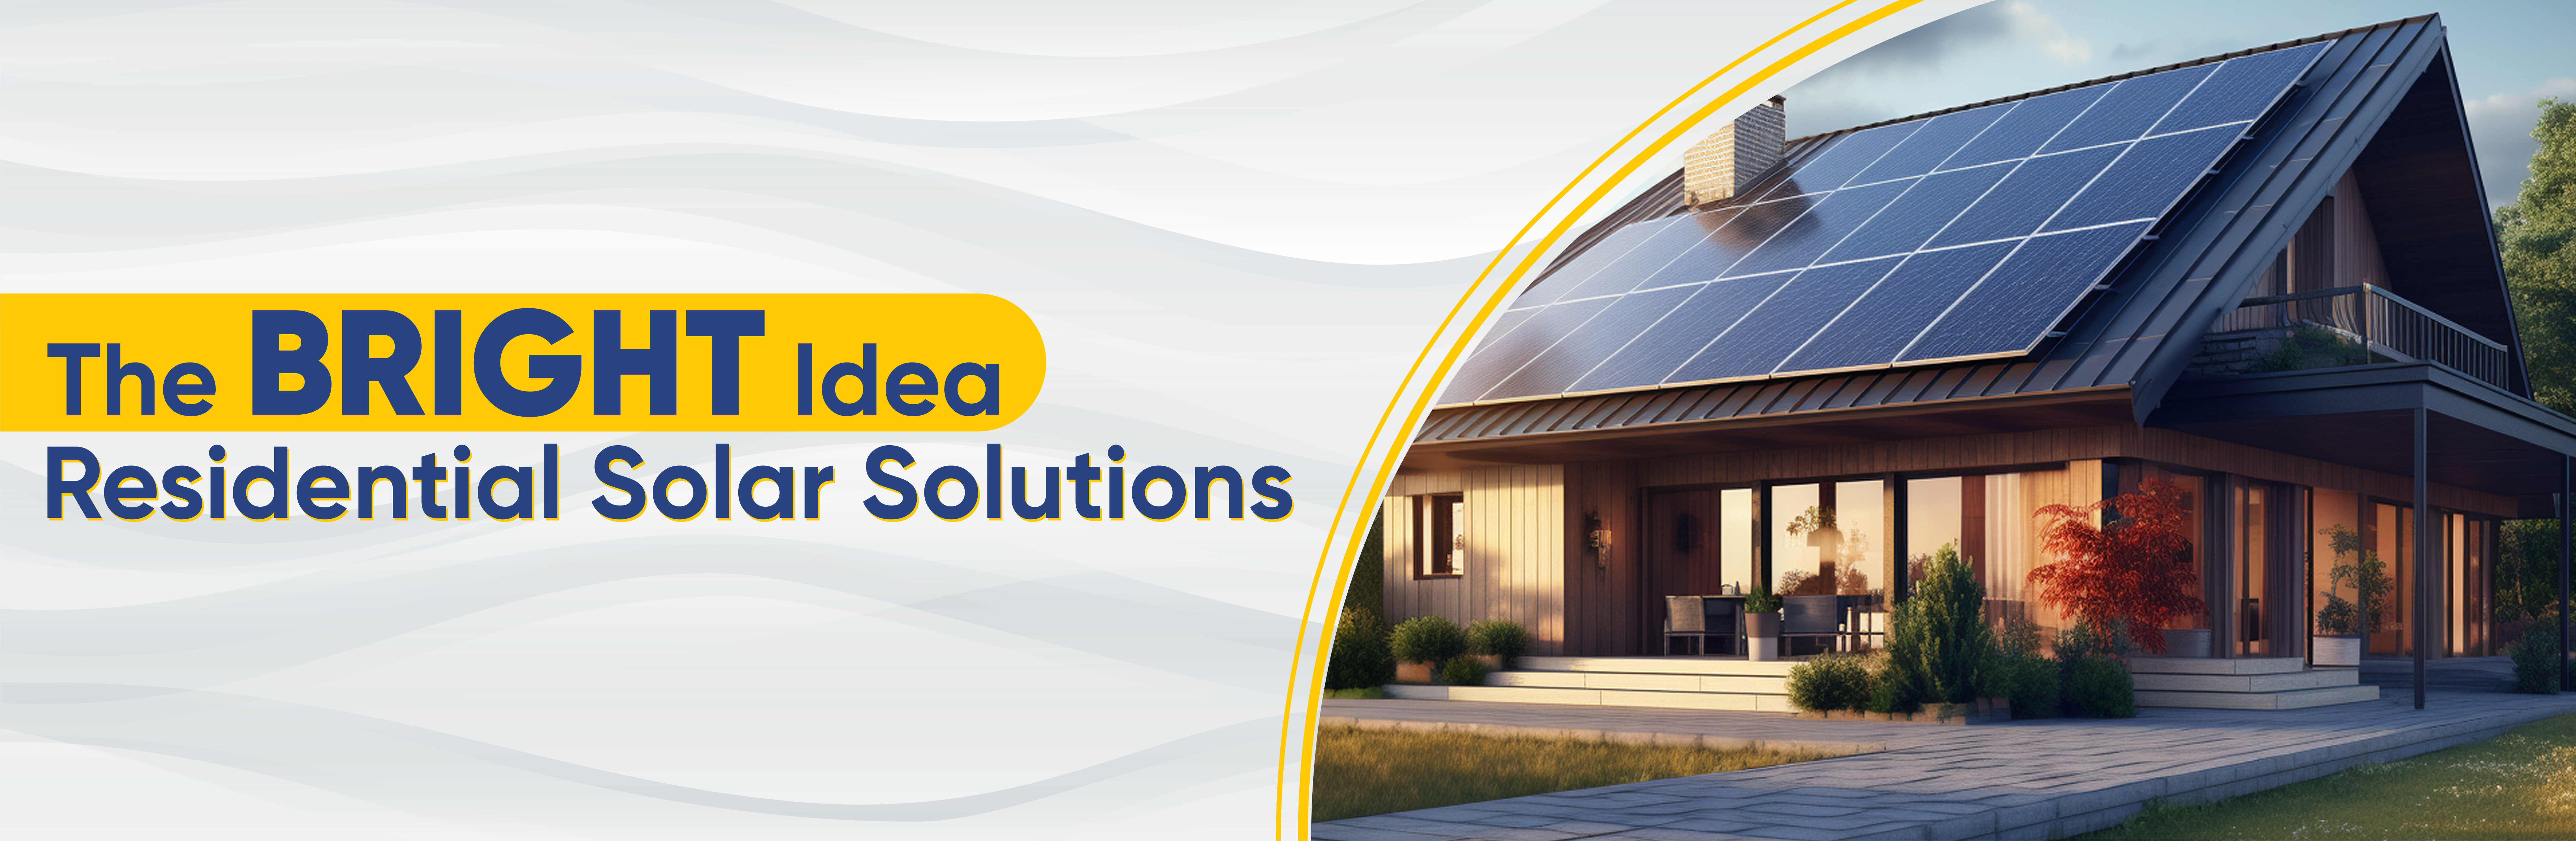 The Bright Idea: Residential Solar Solutions